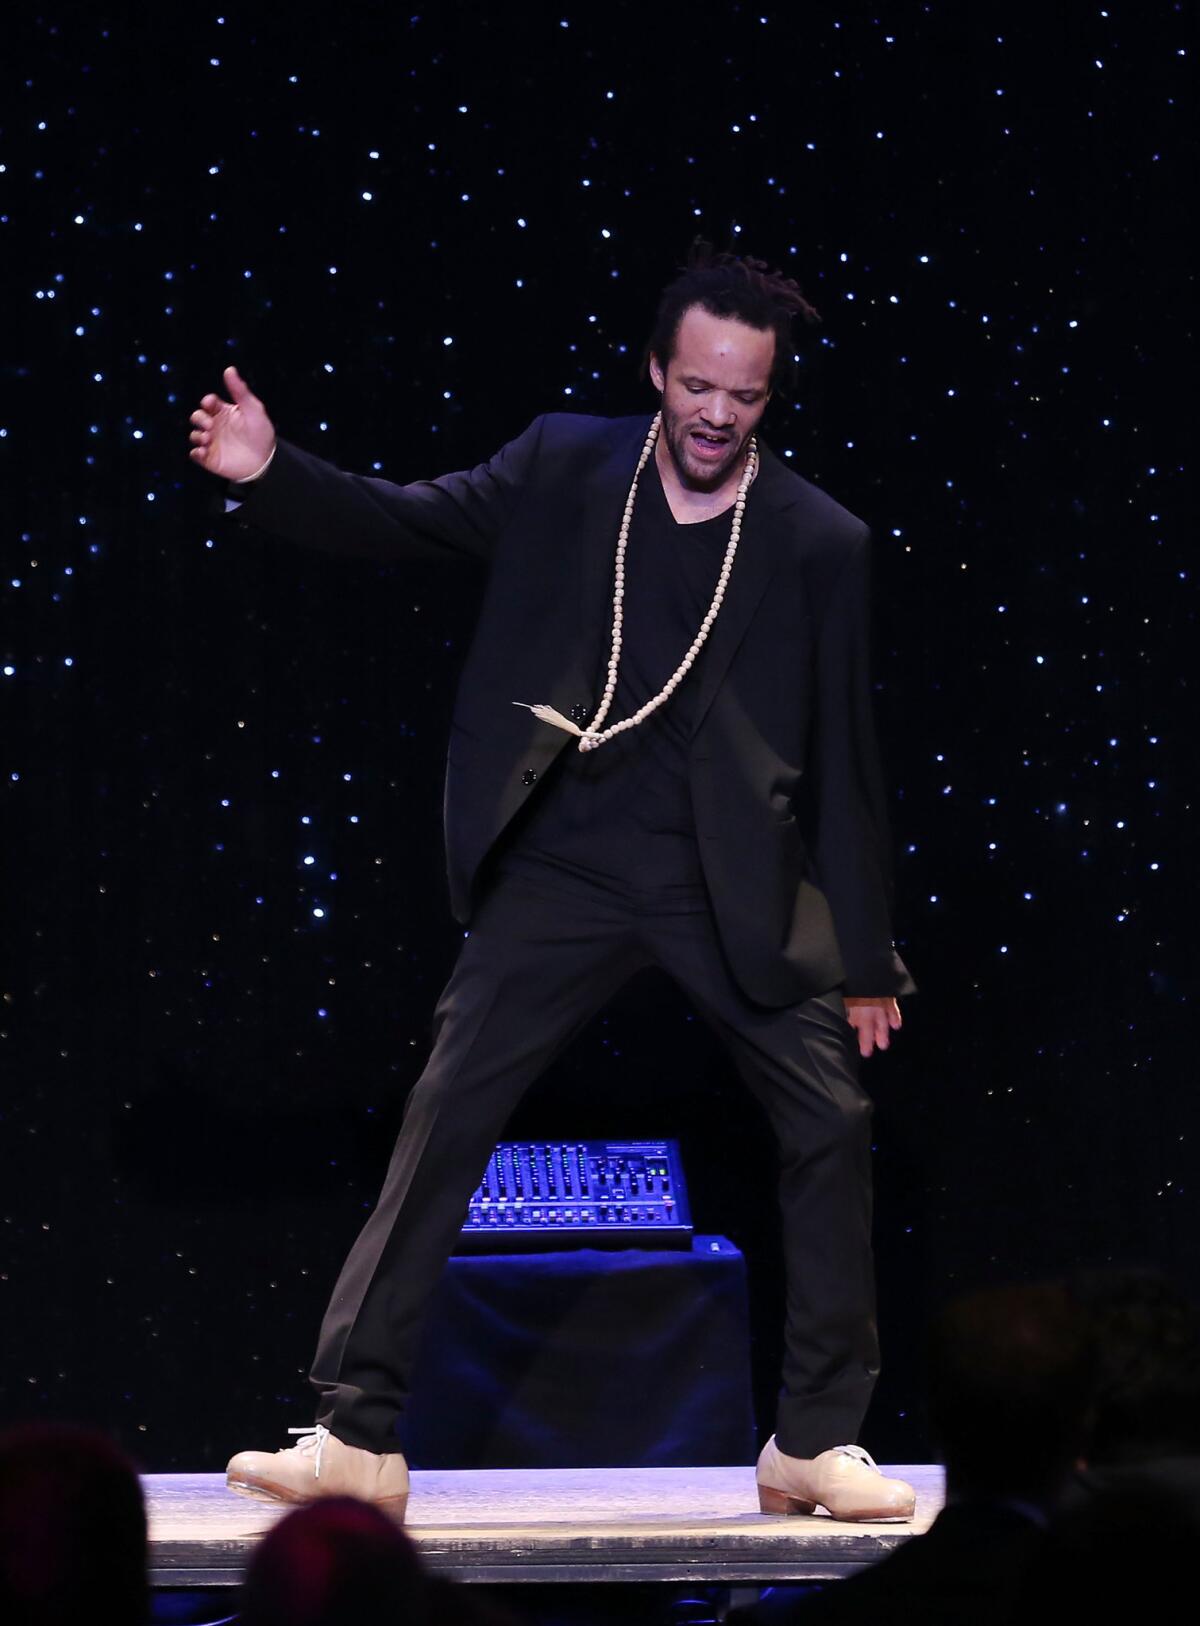 Savion Glover performs at the Monte Cristo Award ceremony honoring “Shuffle Along” director George C. Wolfe, presented by the Eugene O'Neill Theater Center on May 9 in New York. (Jemal Countess / Getty Images / Eugene O'Neill Theater)